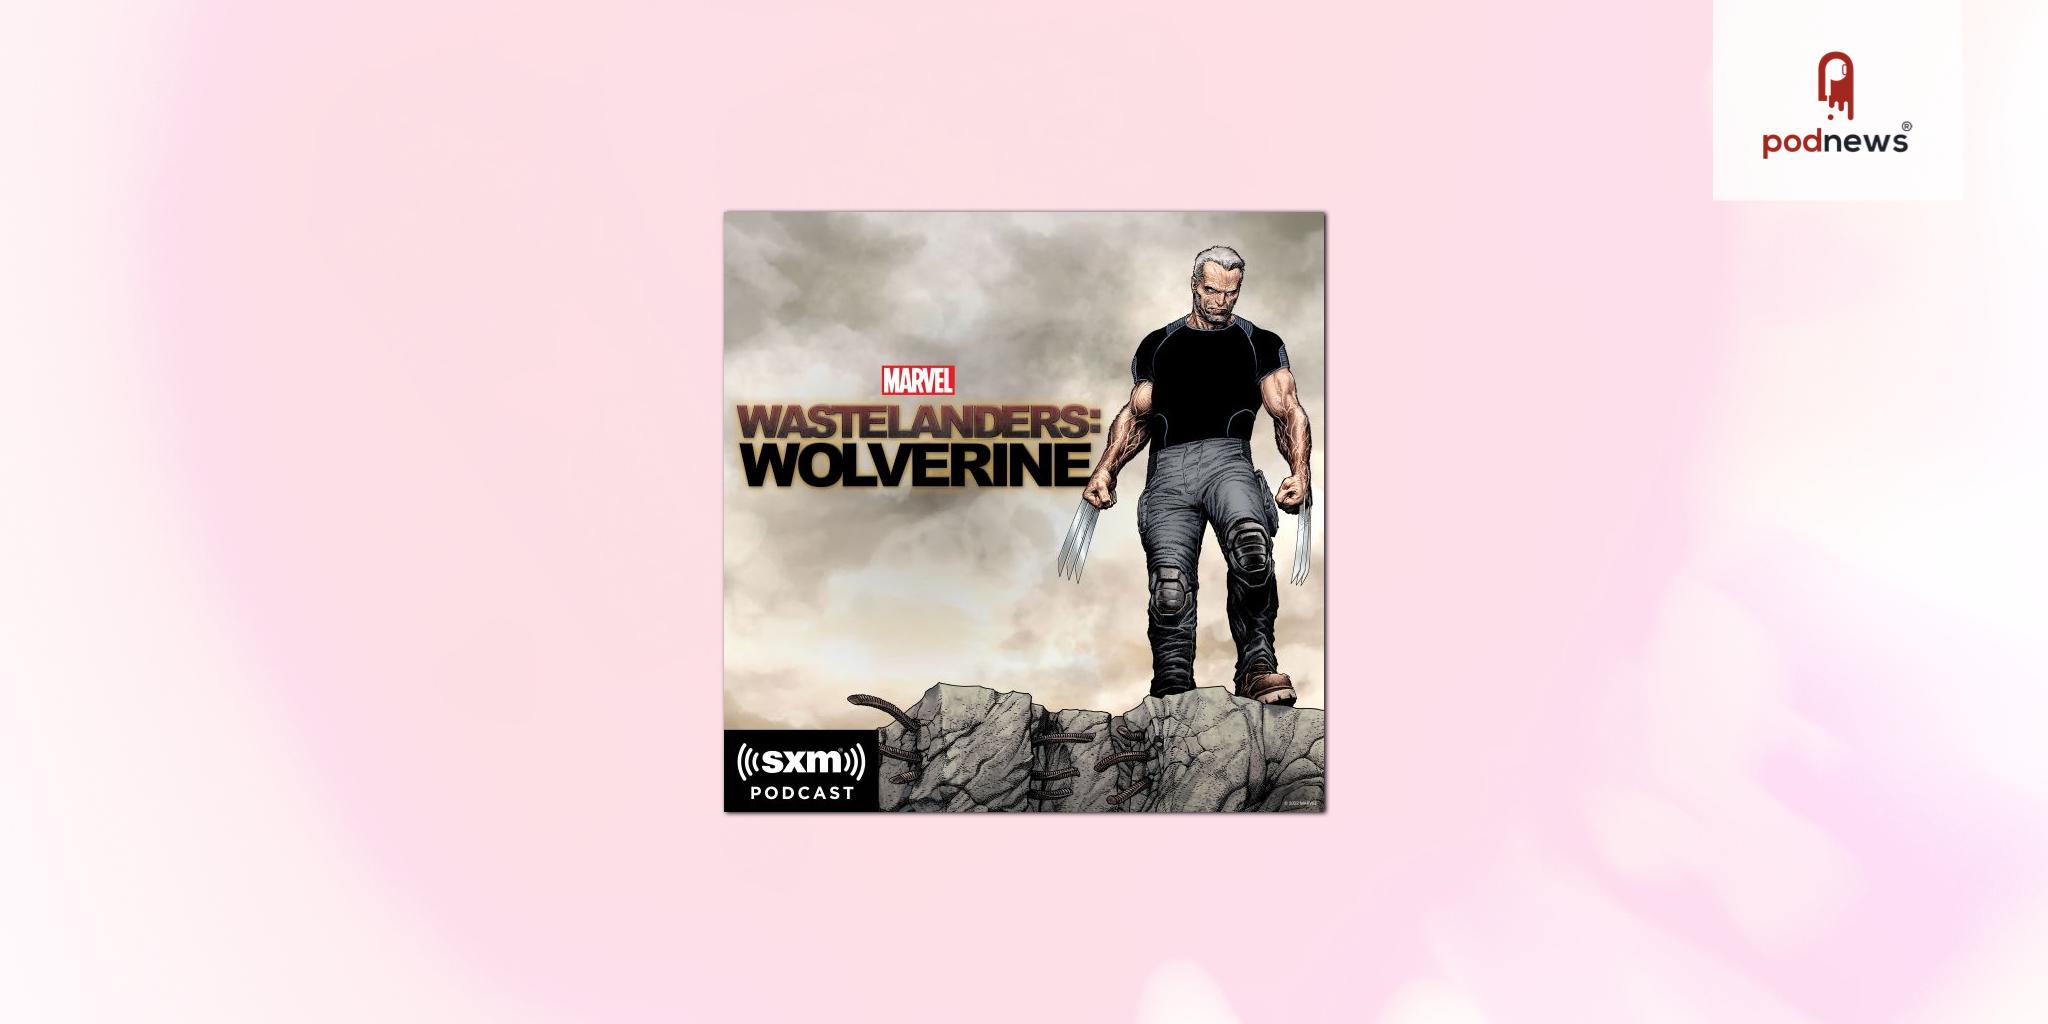 Marvel Entertainment and SiriusXM premiere new scripted podcast Marvel's Wastelanders: Wolverine